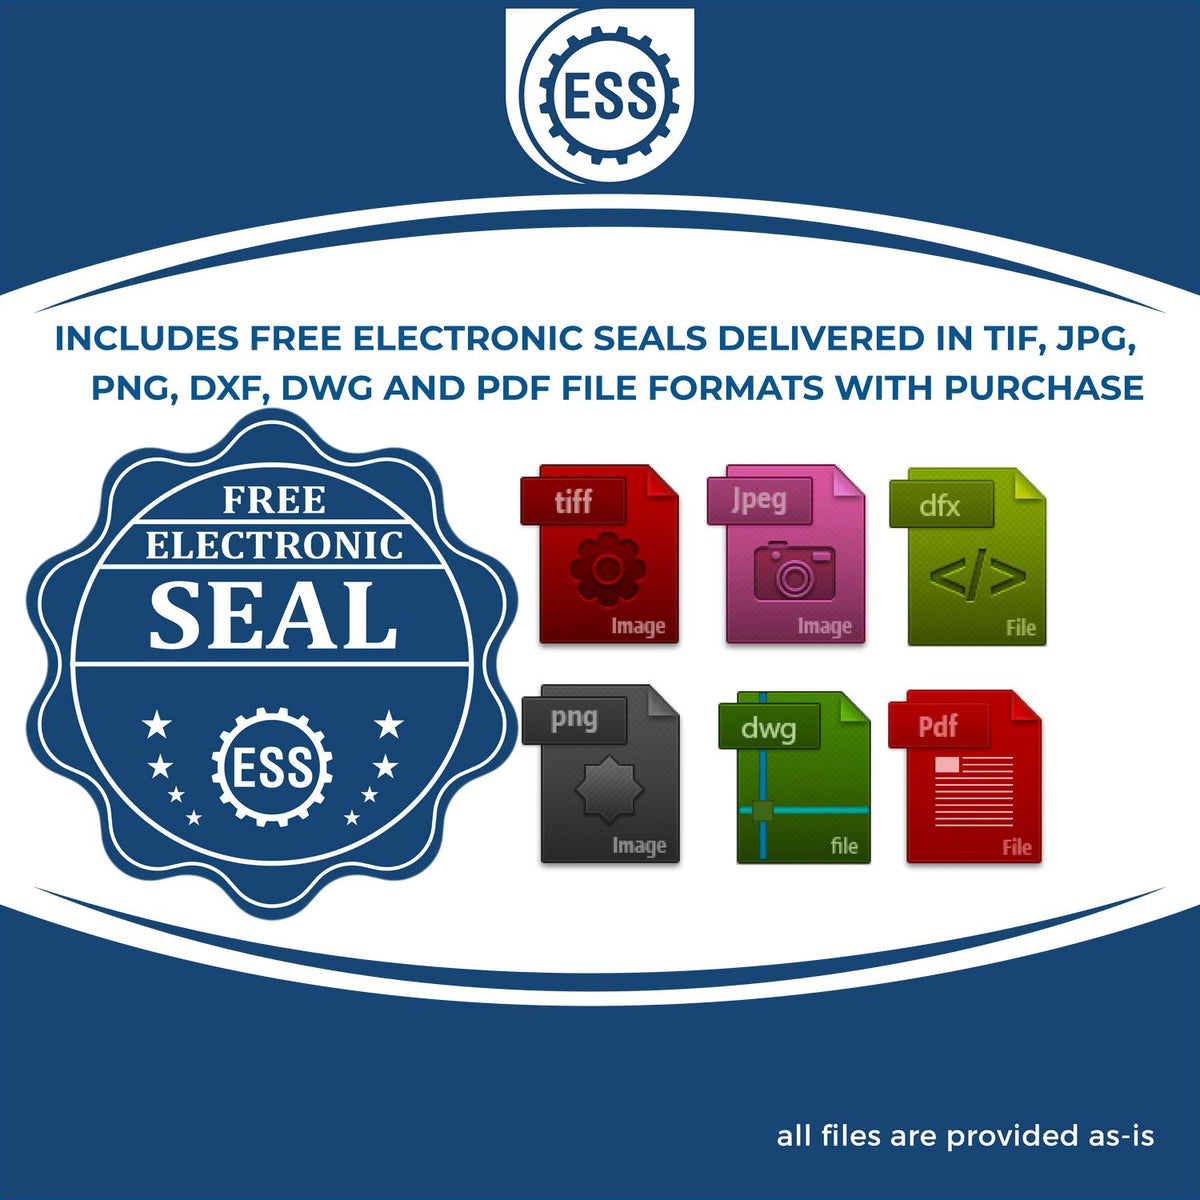 An infographic for the free electronic seal for the New Hampshire Engineer Desk Seal illustrating the different file type icons such as DXF, DWG, TIF, JPG and PNG.